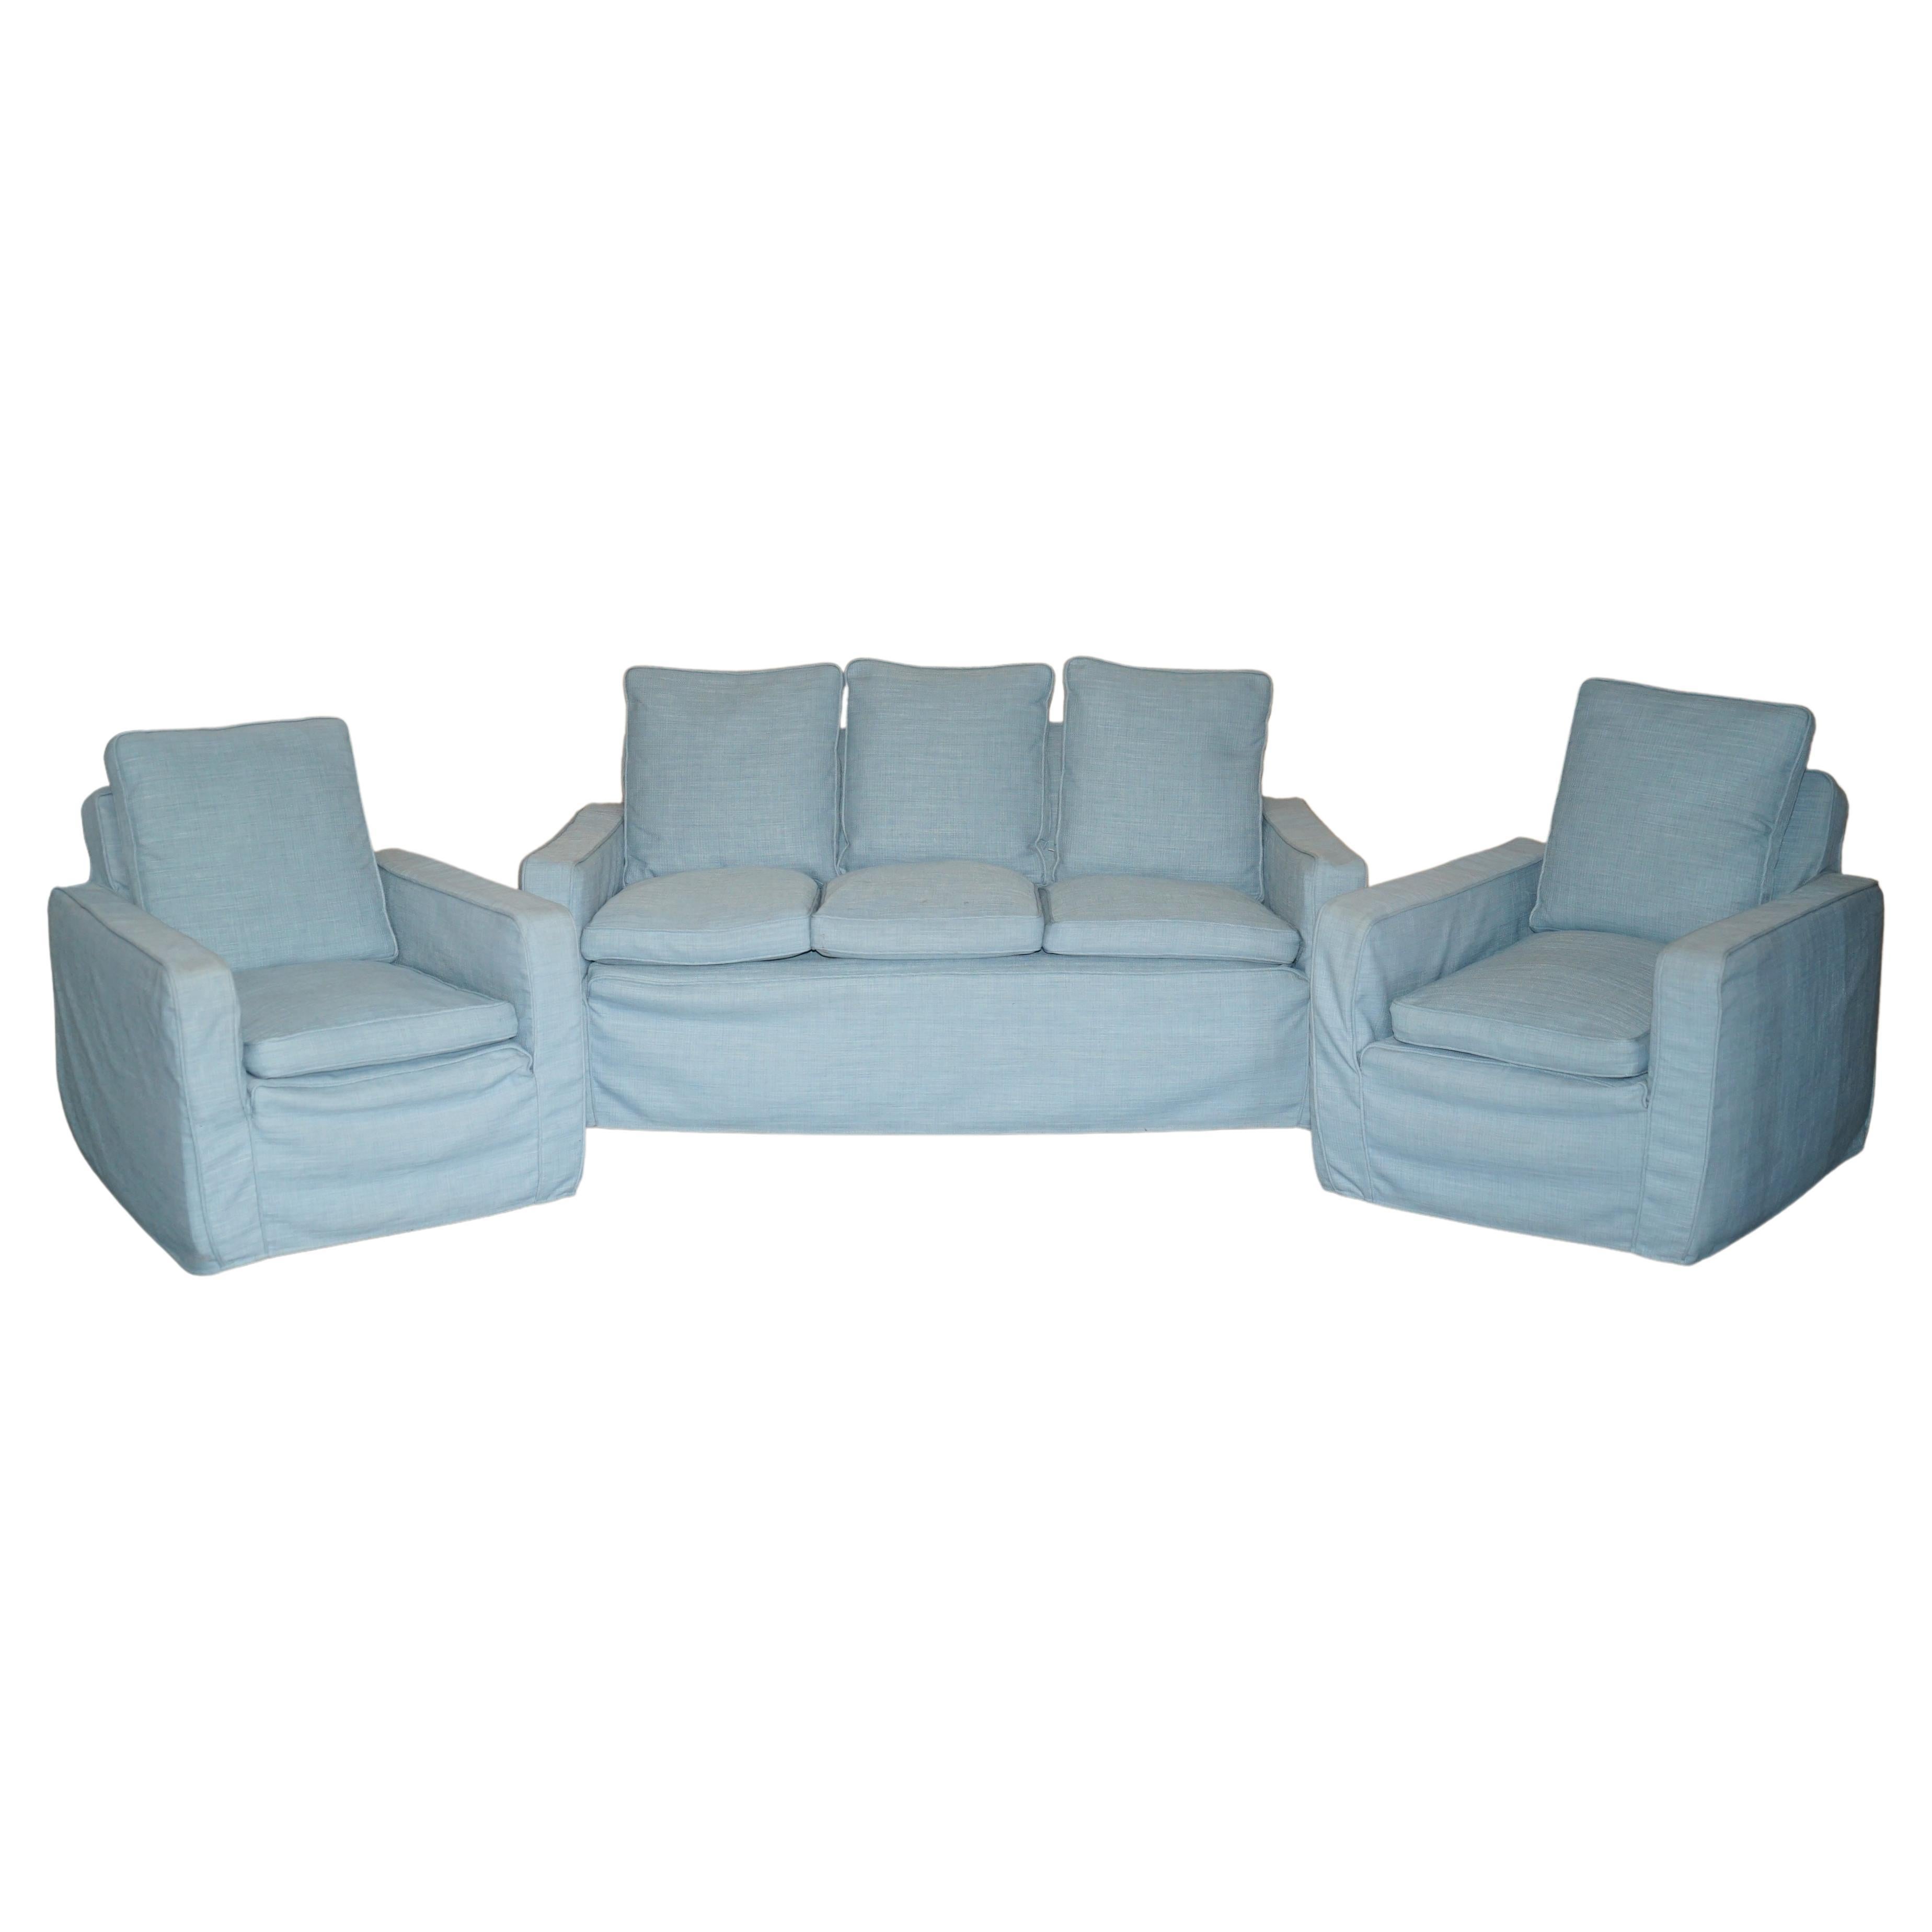 Royal House Antiques

Royal House Antiques is delighted to offer for sale this SUPER RARE and highly collectable Minty Oxford three piece sofa and pair of armchairs suite along with the original 1933 dated receipt!

Please note the delivery fee